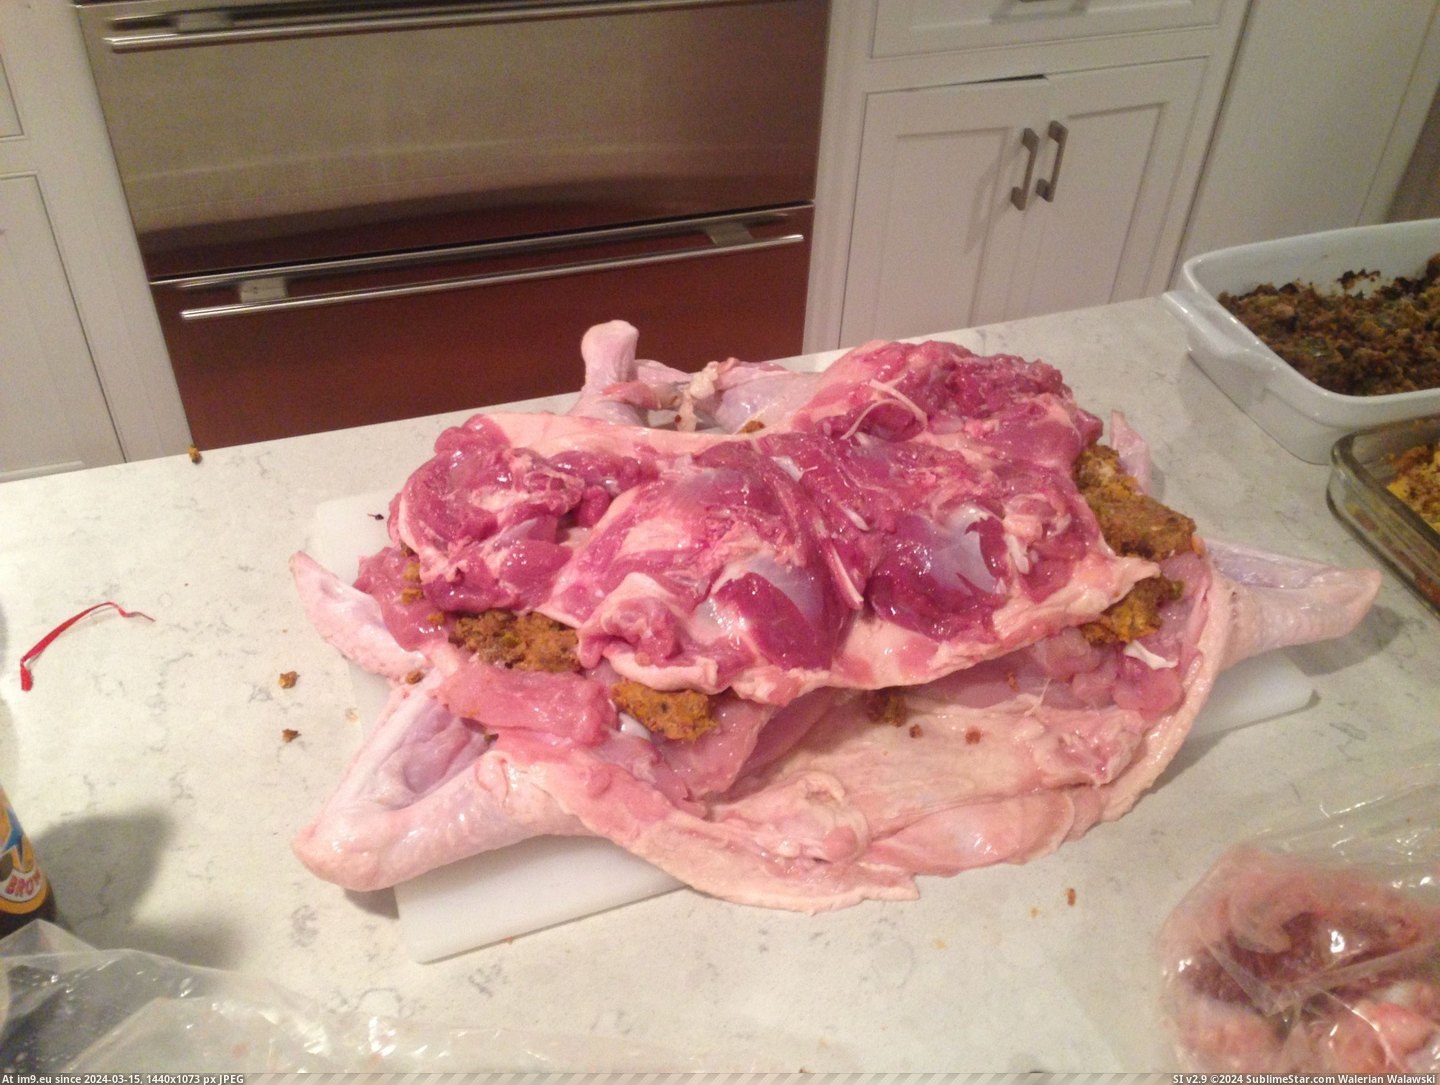 #For #Year #Thought #Thanksgiving #Duck #Turkey #Turducken #Family #See #Chicken [Pics] My family makes turducken (a chicken in a duck in a turkey) every year for Thanksgiving. Thought reddit would like to see Pic. (Bild von album My r/PICS favs))